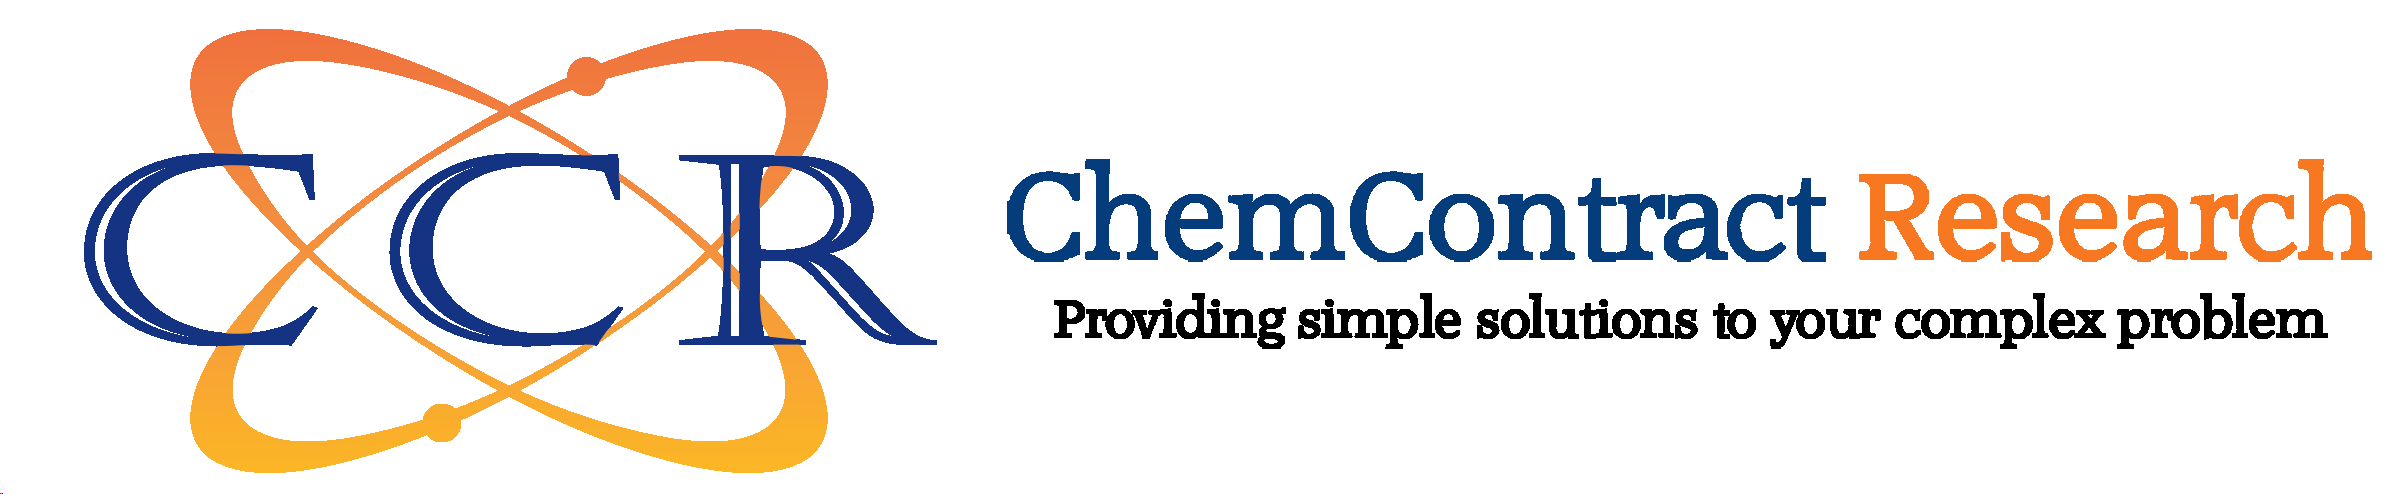 ChemContract Research Inc.